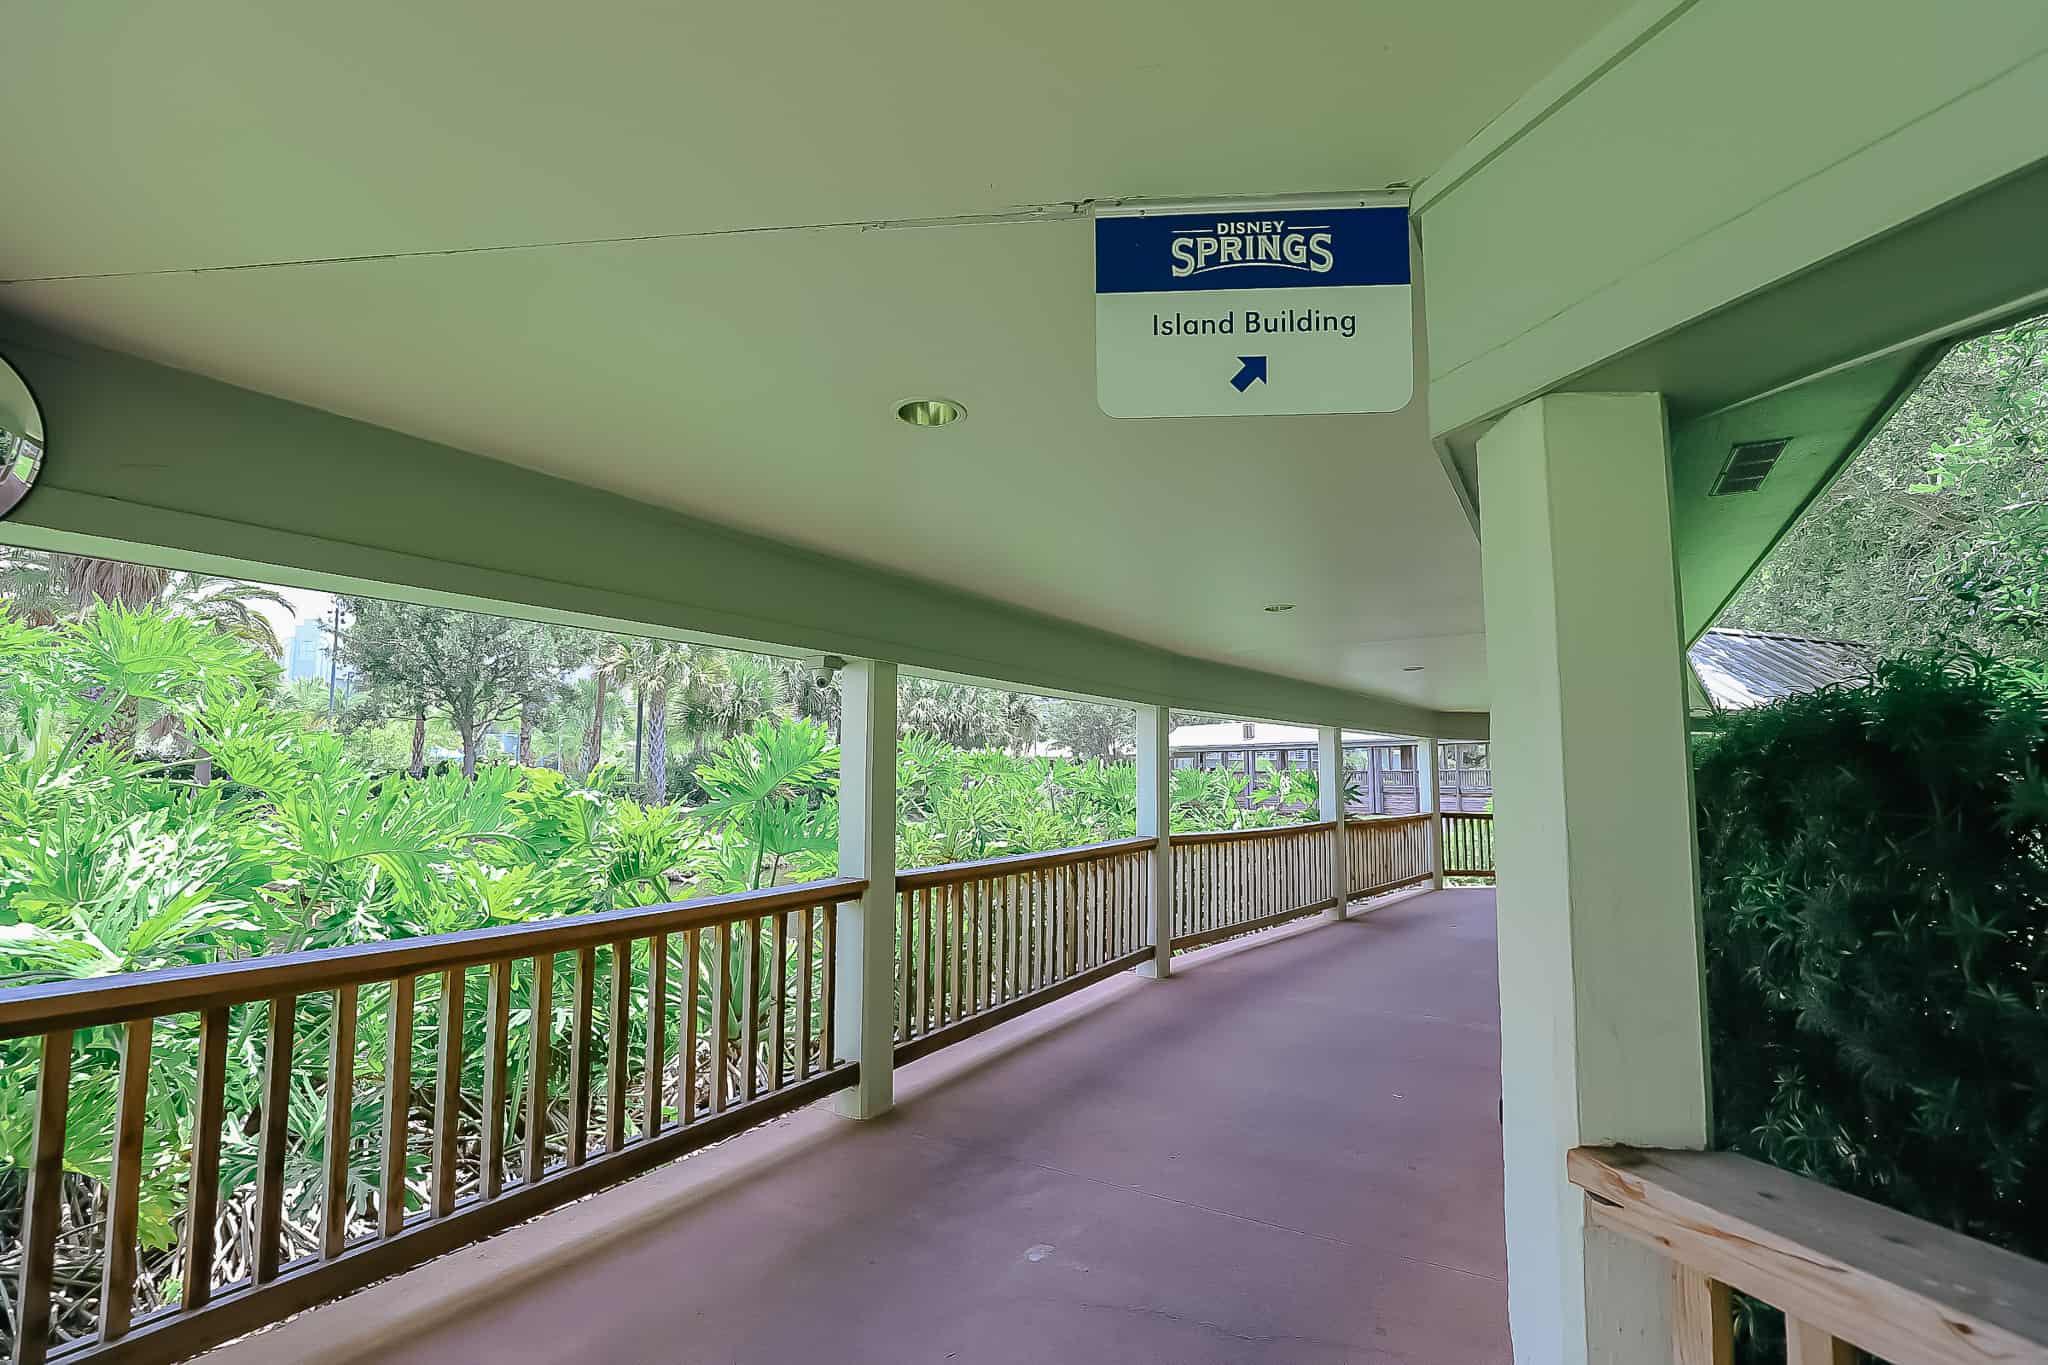 sign that says this way to Disney Springs and the Island Building 